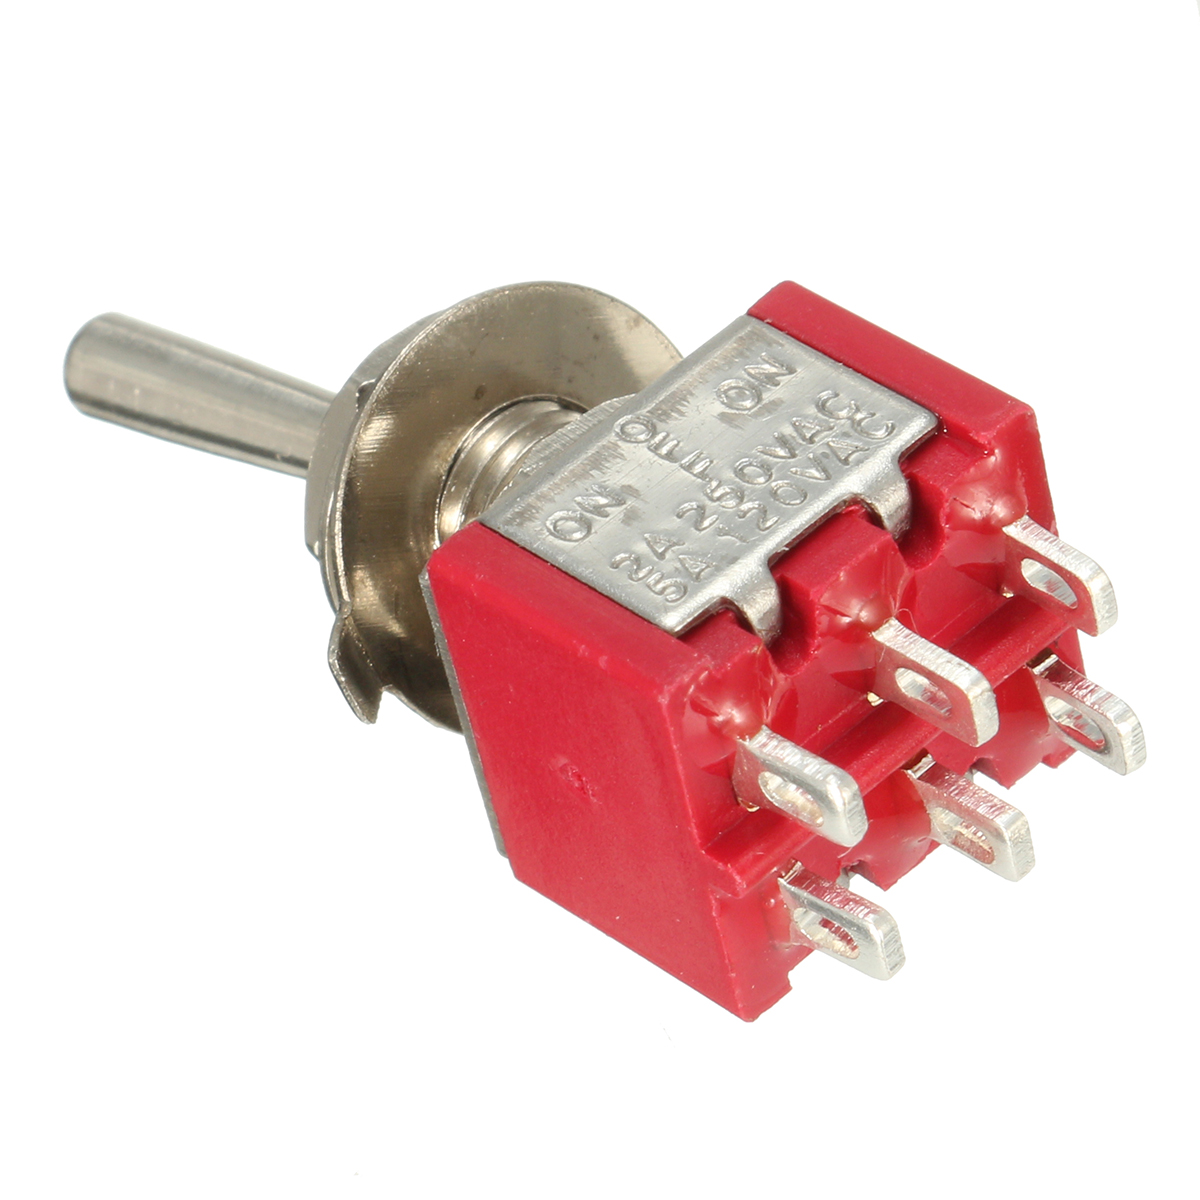 Red Miniature Toggle Switch DPDT On-Off-On 6 Pins 3 Position 5A 120Vac /2A 250Vac